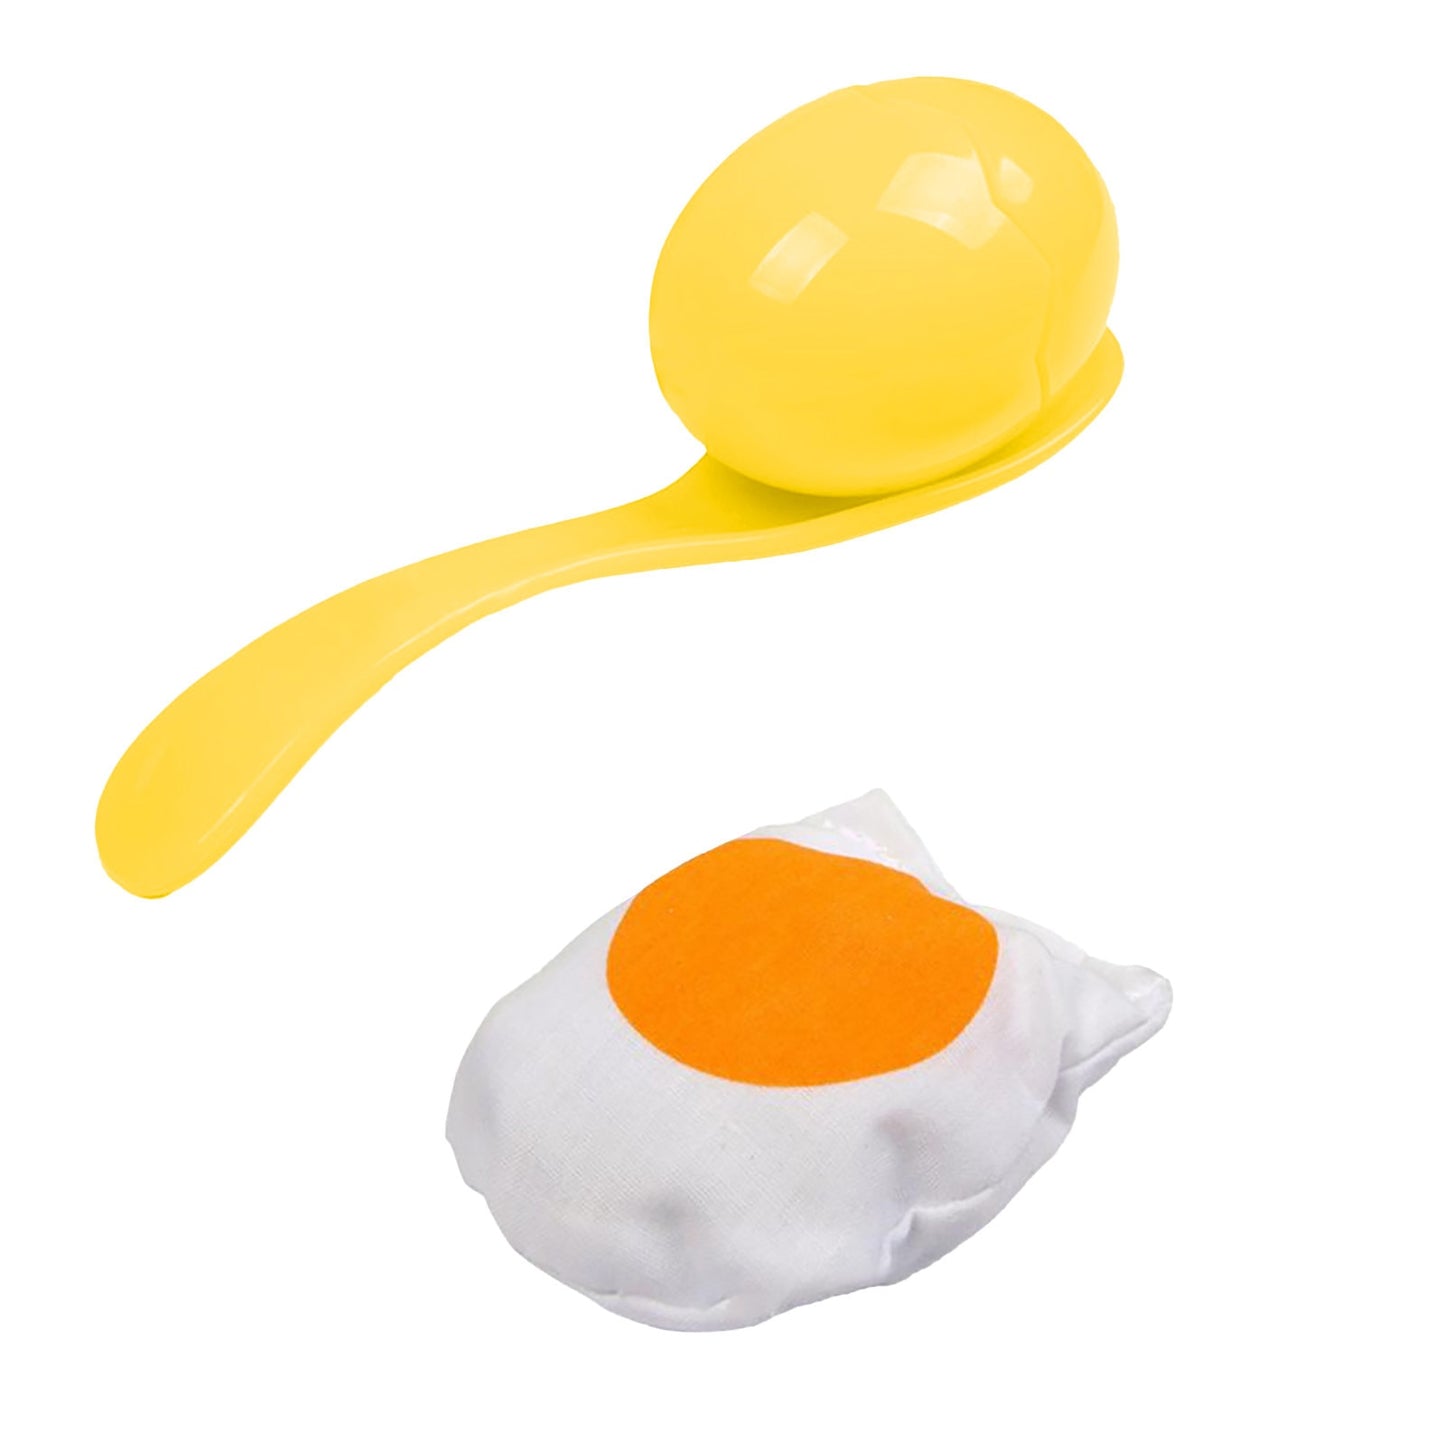 Eggs and Spoon Race Game Set: Fun and Exciting Sports Activity for Kids